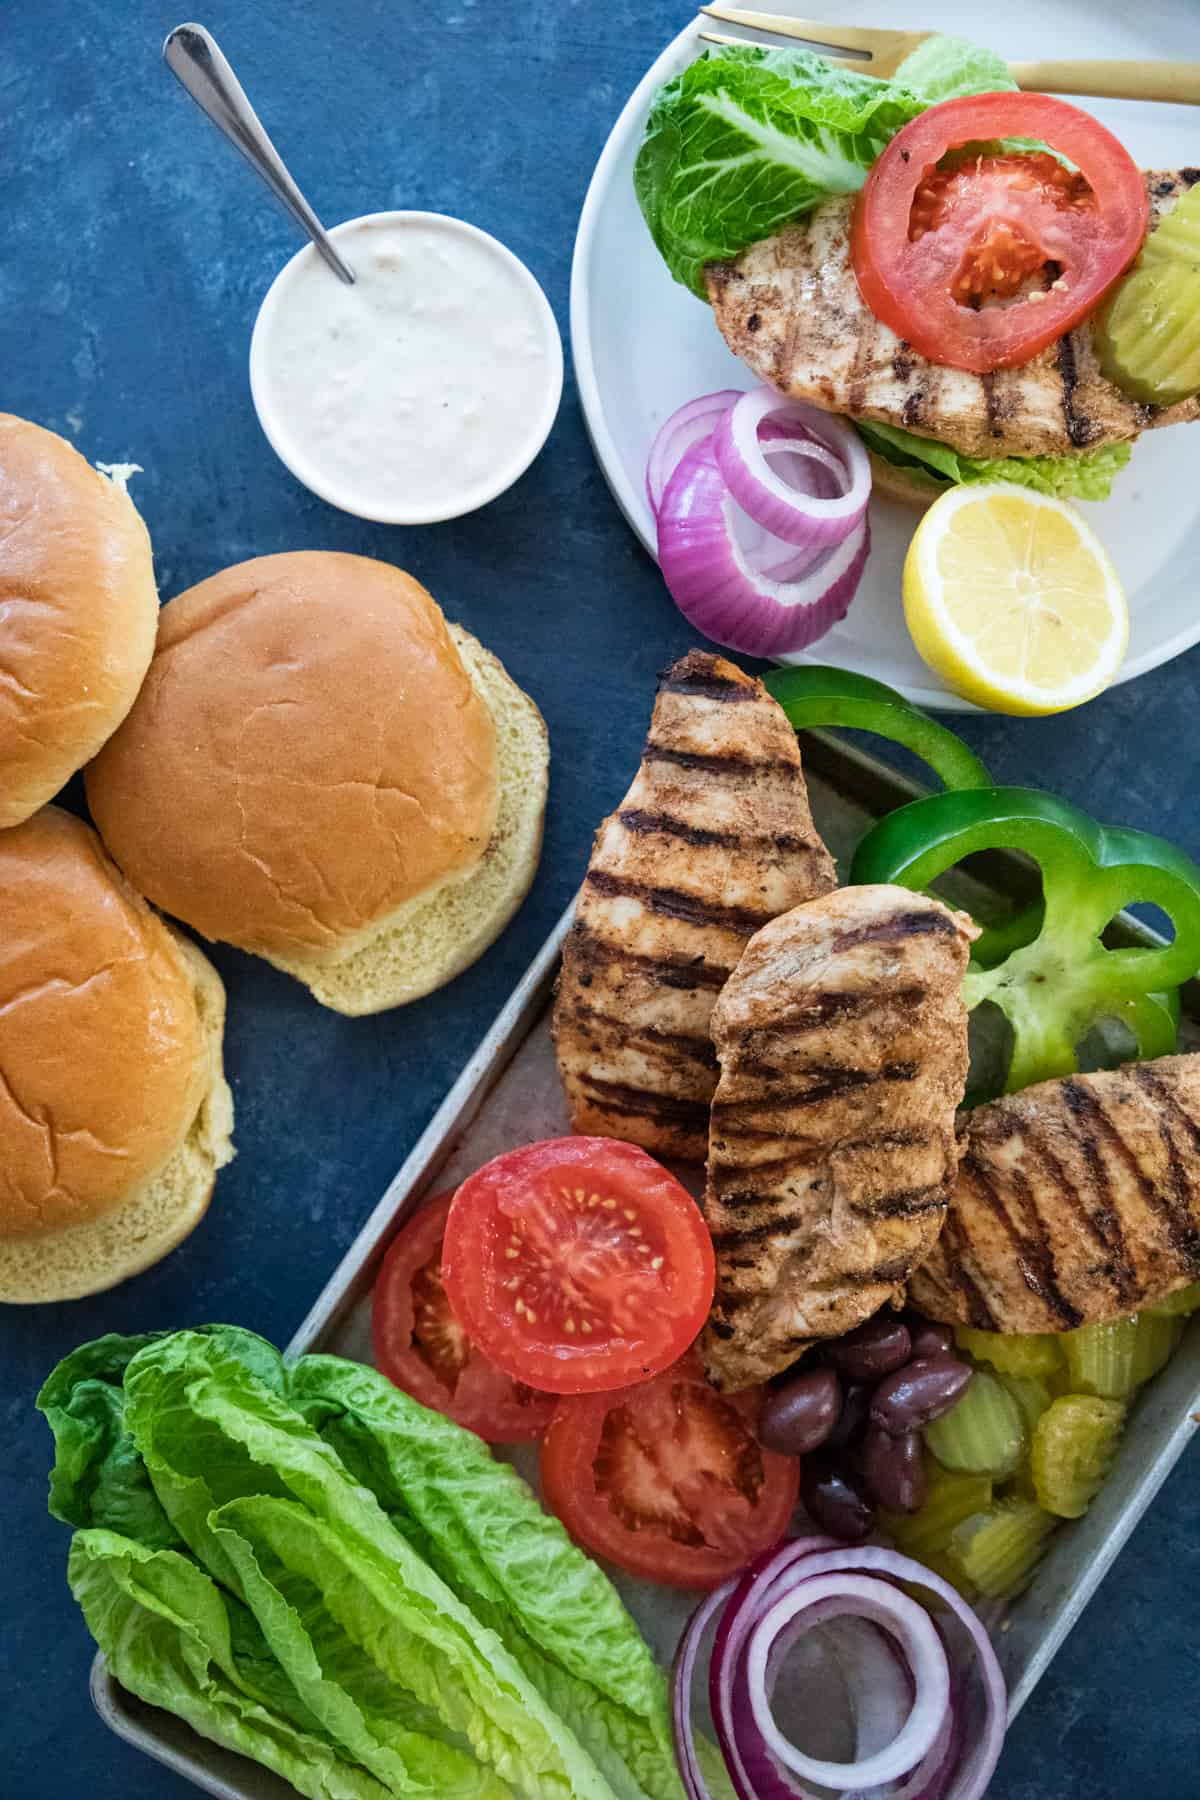 juicy chicken breast with onion, lettuce and tomatoes and pickles with buns.